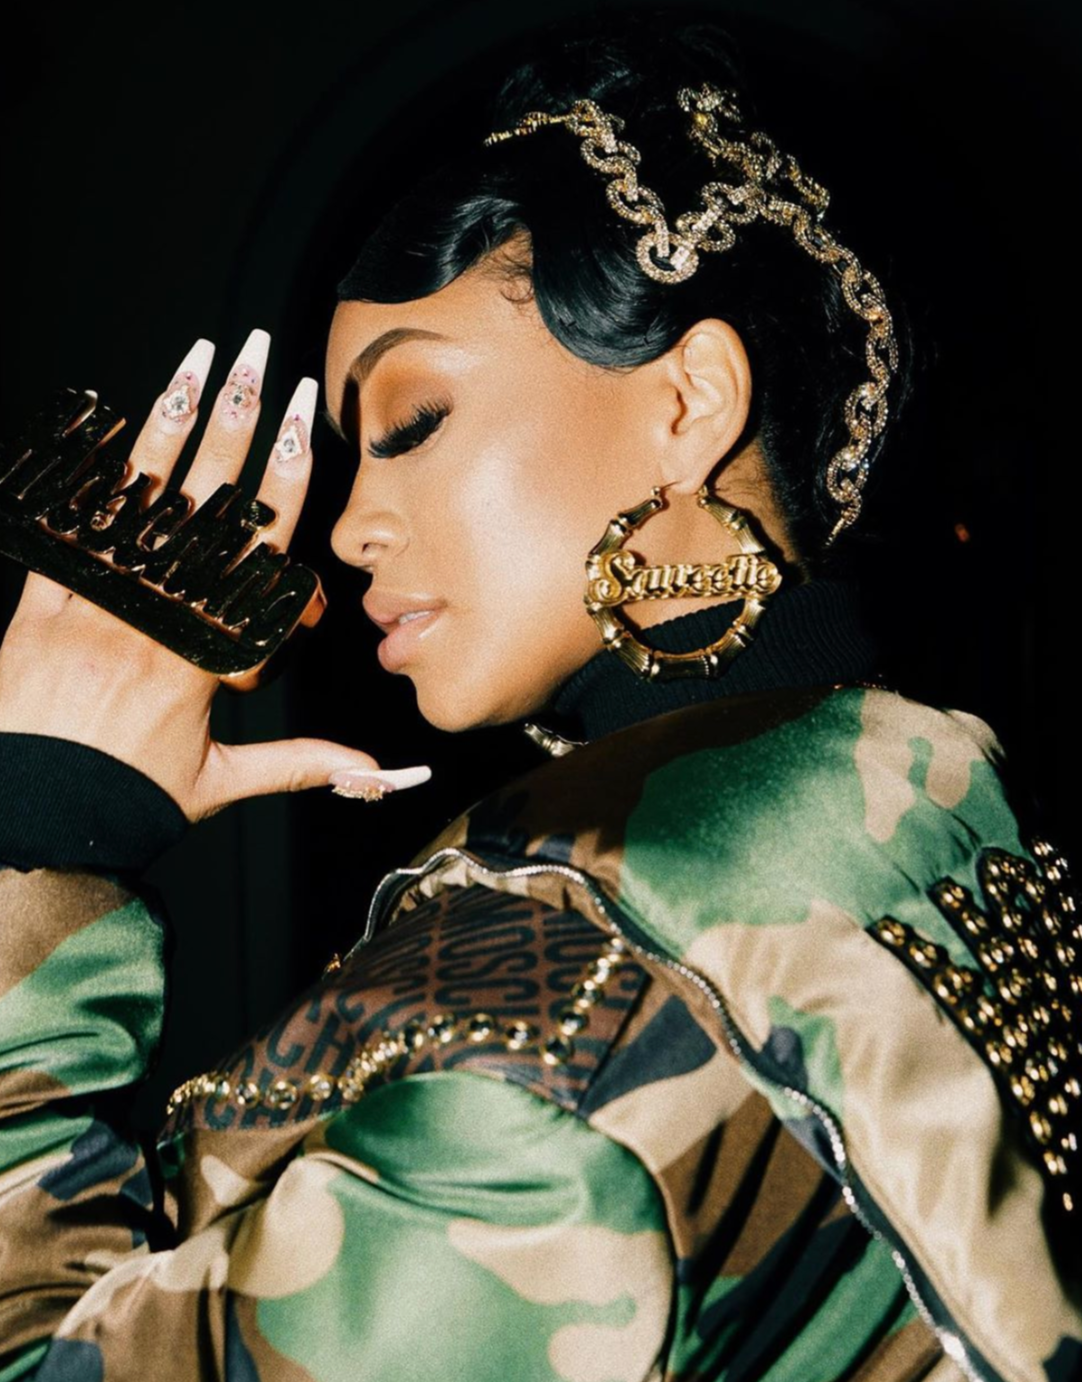 Saweetie Is The Queen Of Fly Nail Art And Her Latest Manicure Is A Must-See